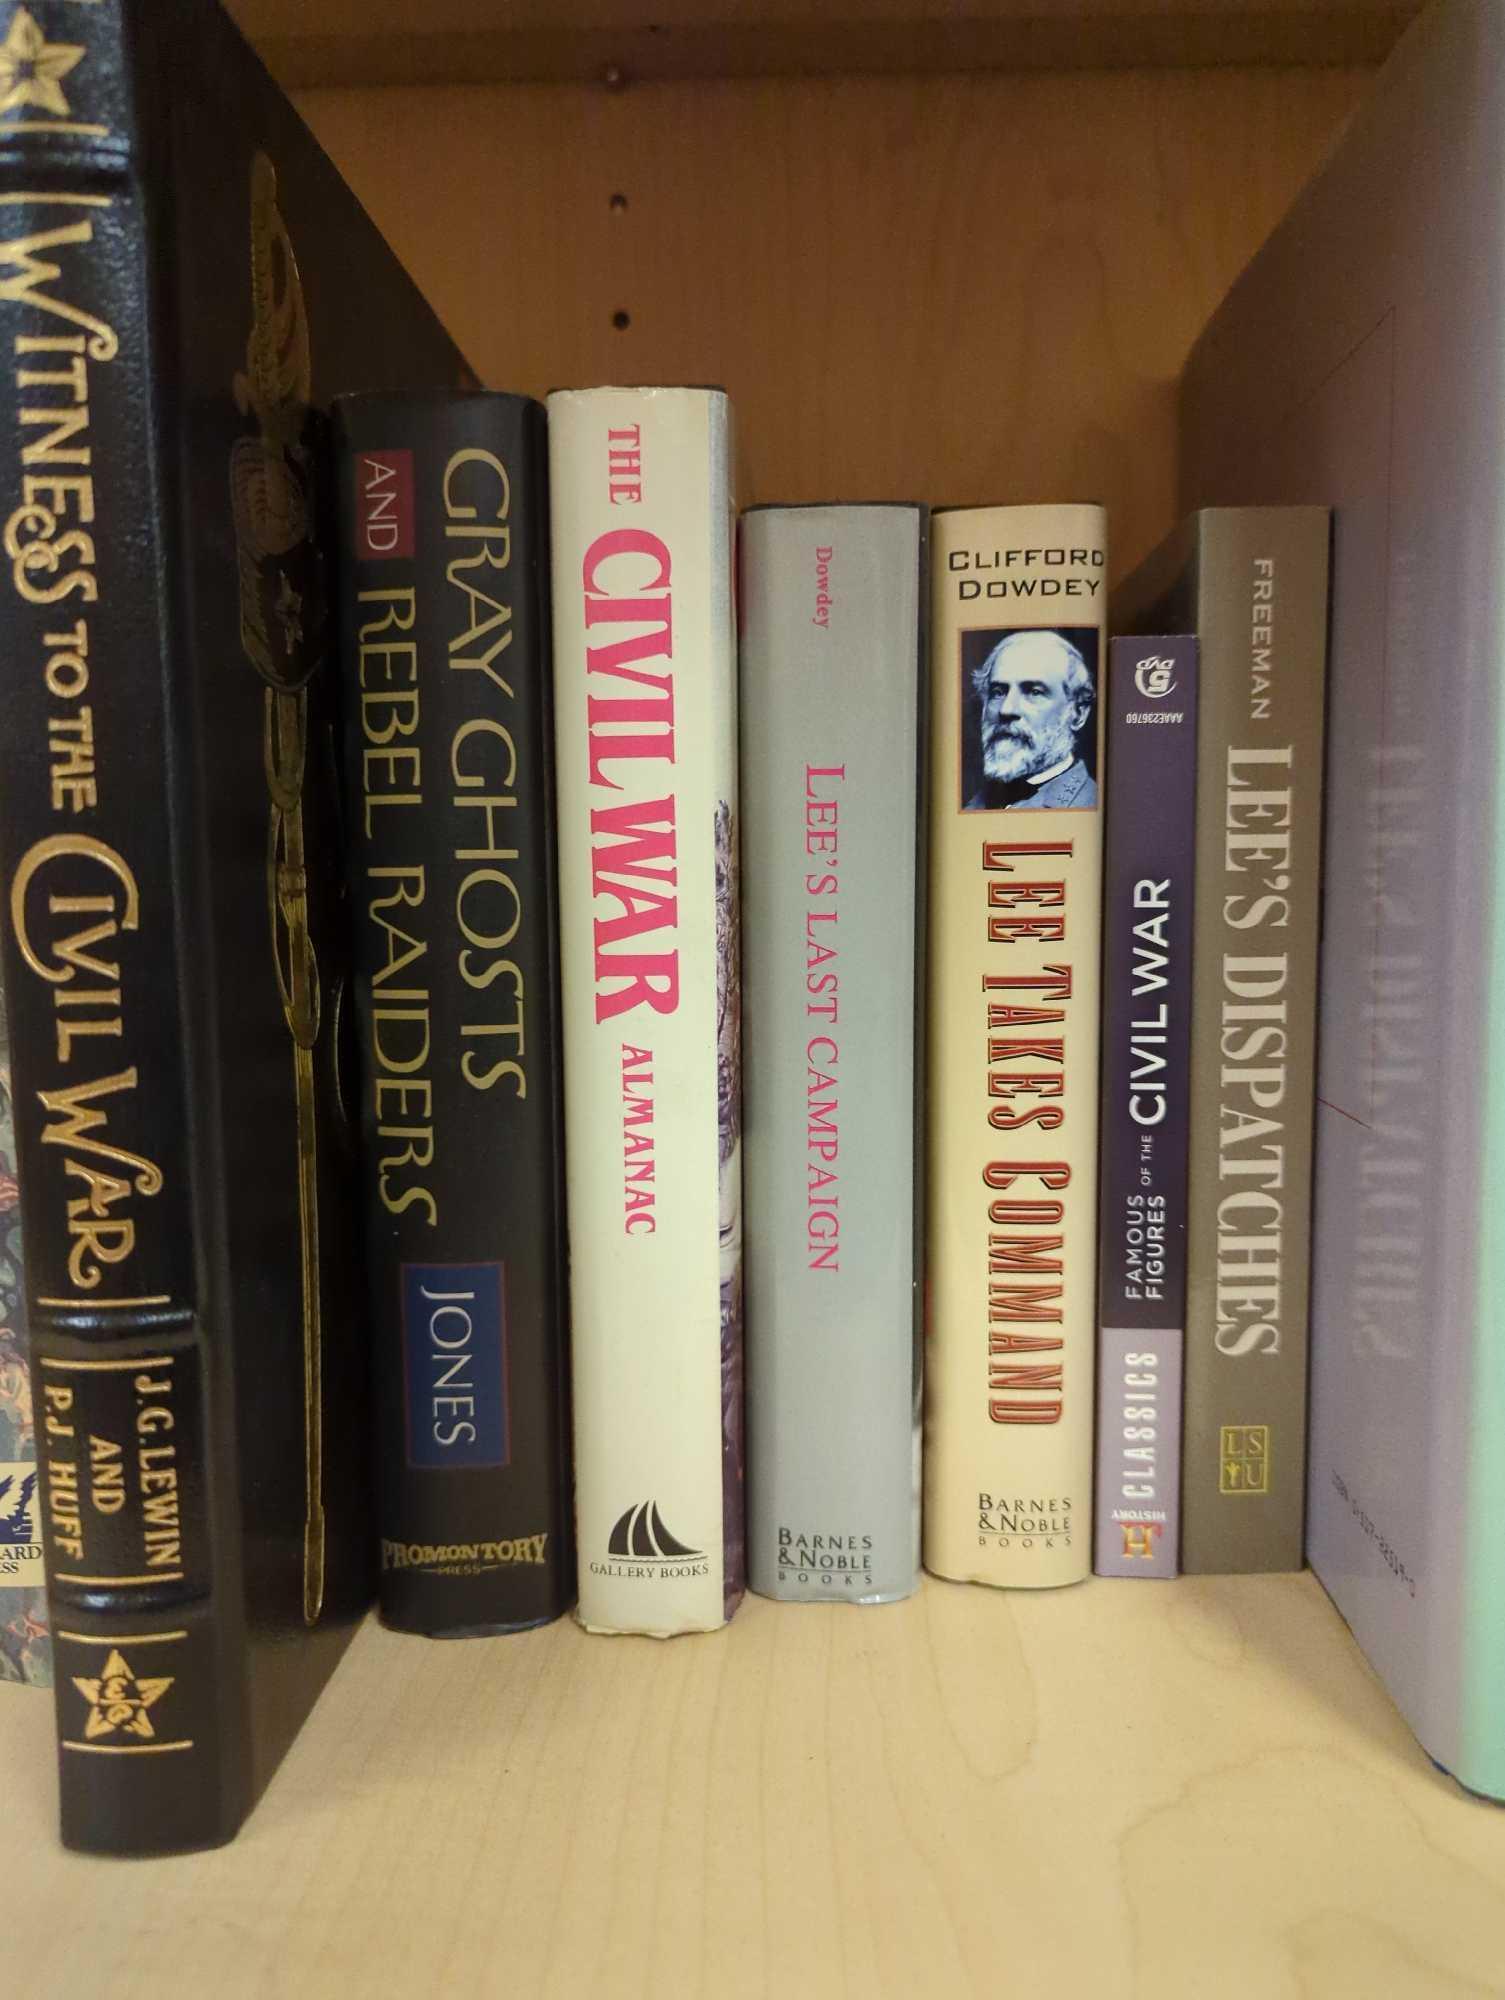 (2) Shelf Lots Of Assorted Books To Include, Witness of The Civil War, Friends Divided, Jeffersons